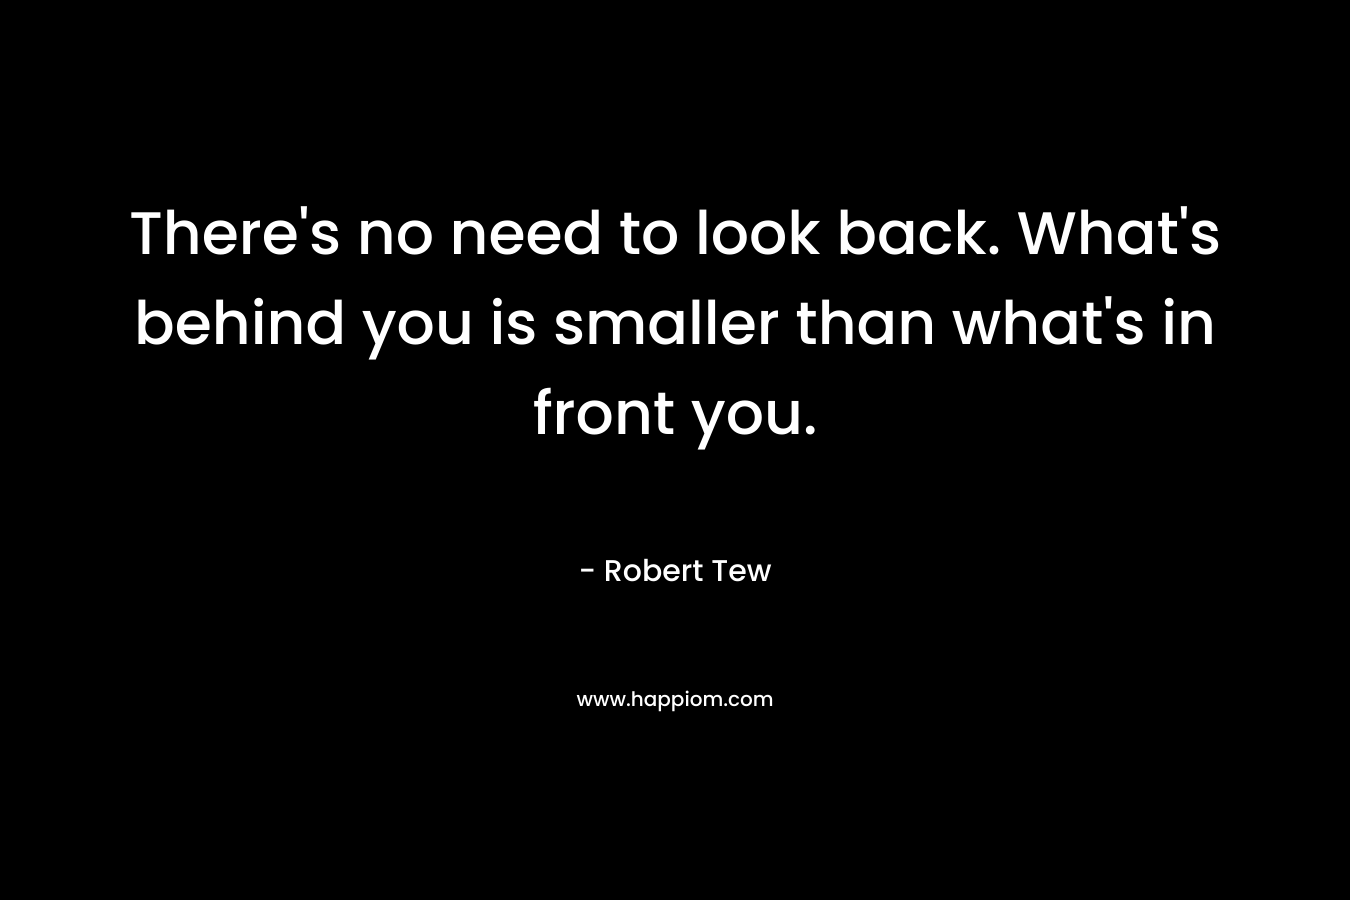 There's no need to look back. What's behind you is smaller than what's in front you.